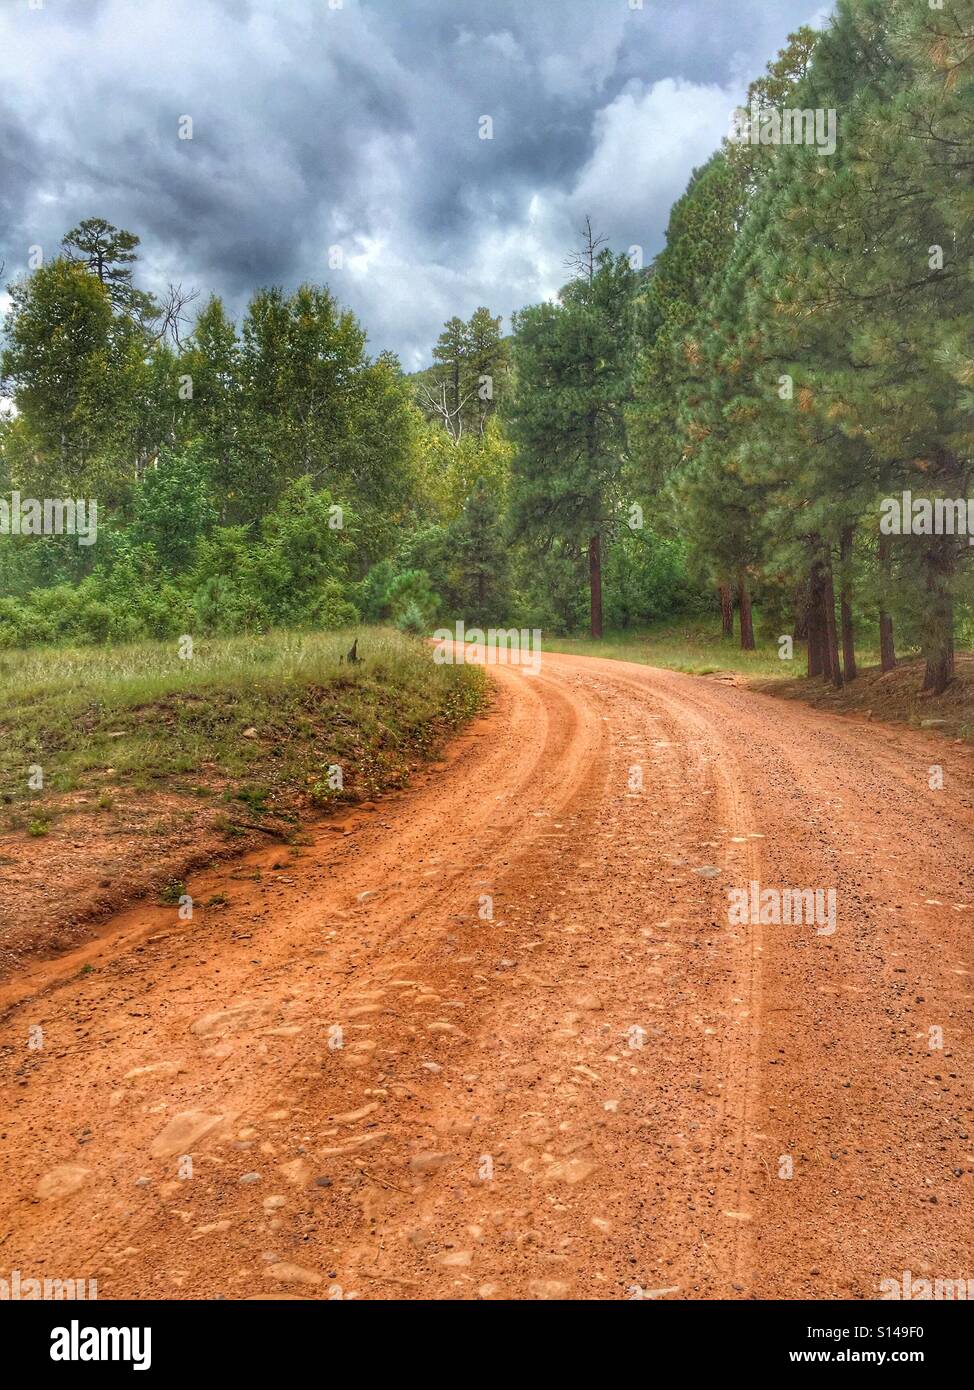 Forest Road through pine forest. Arizona's Sitgreaves national forest. USA Stock Photo